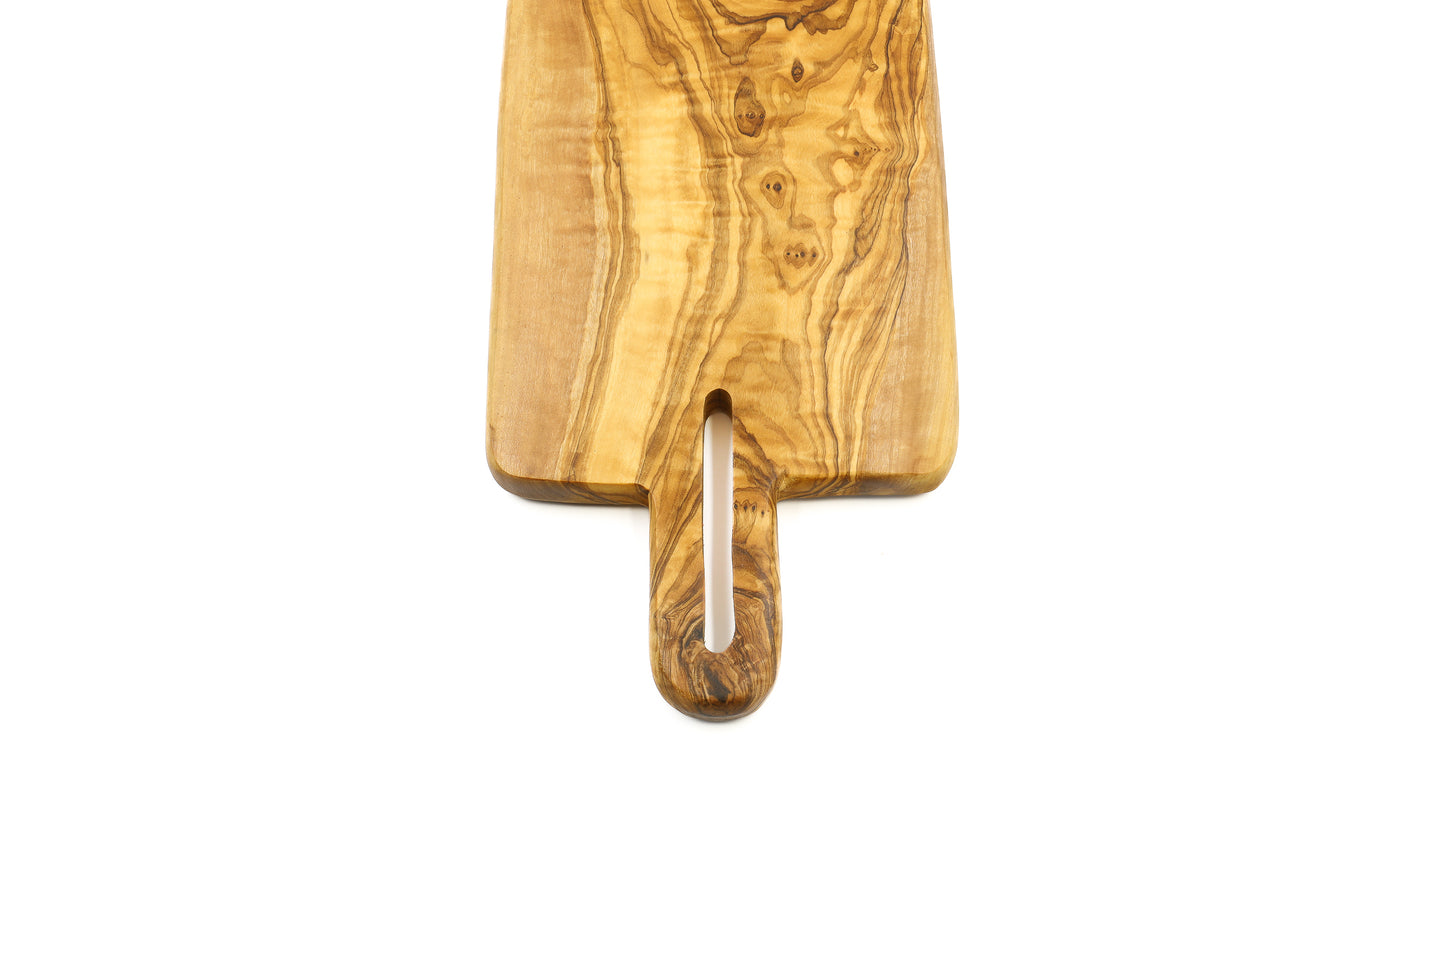 Olive wood kitchen board with a chic and stylish design